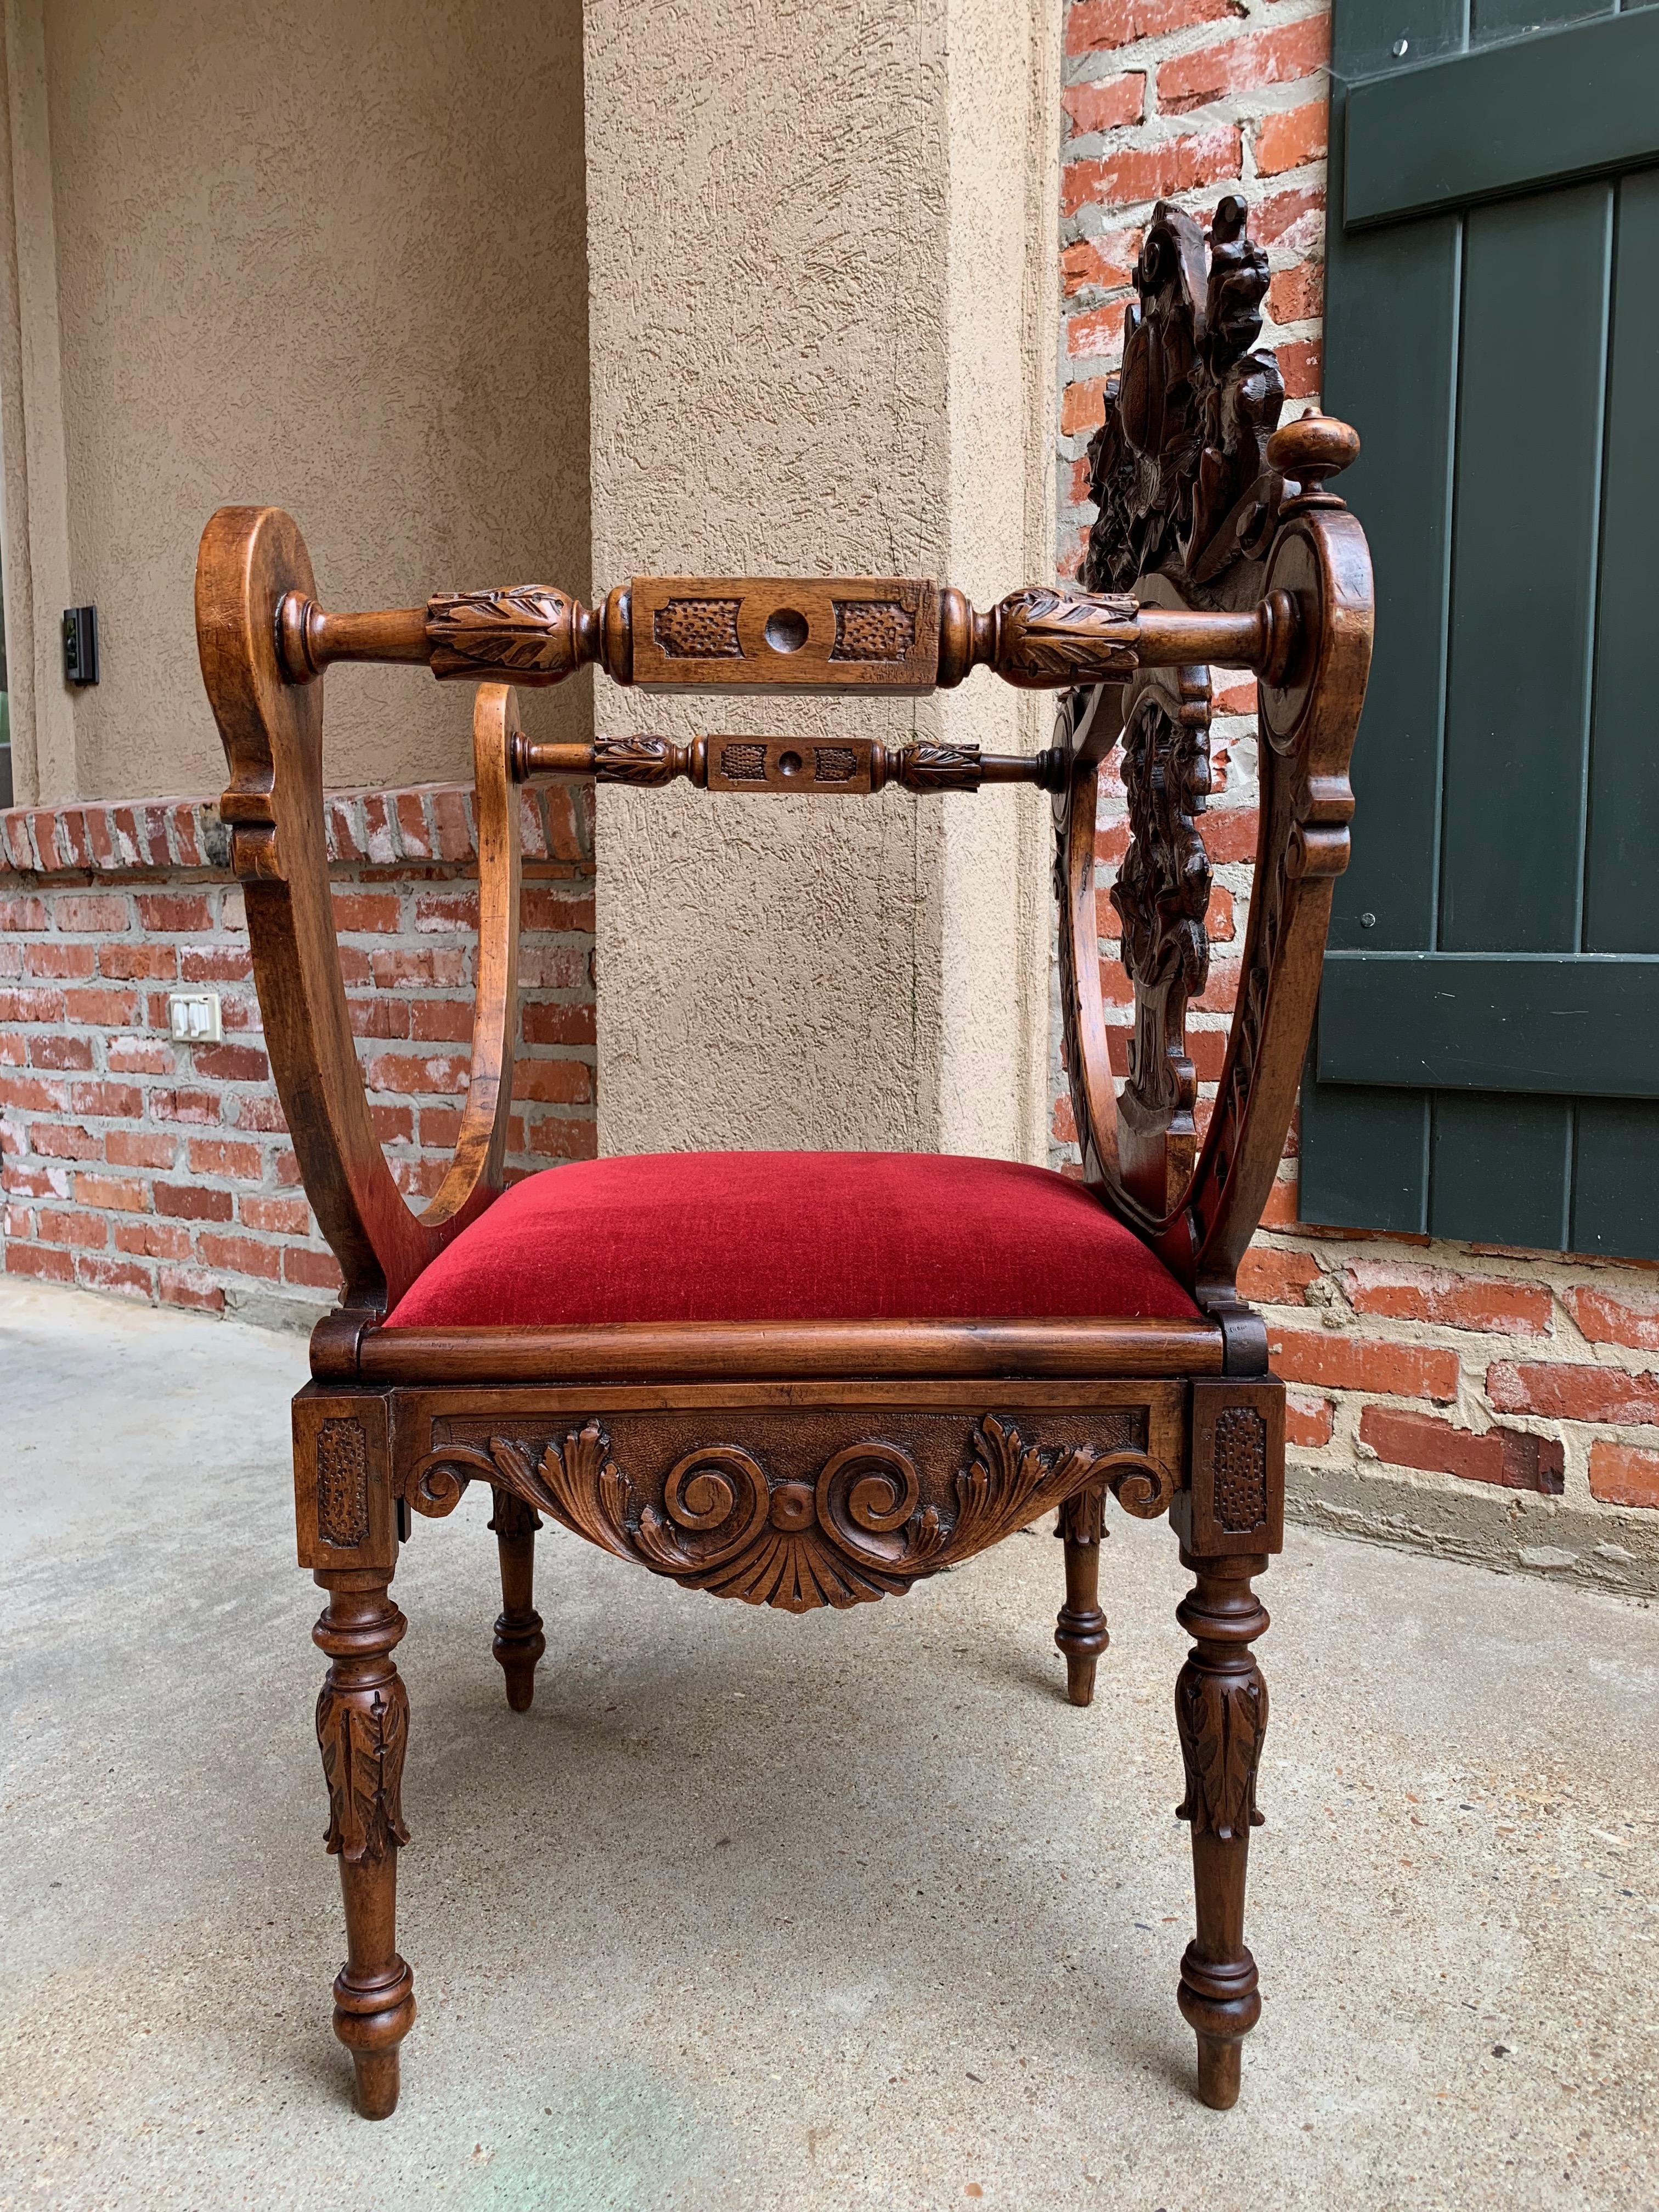 19th Century Antique French Carved Wood Dagobert Chair Curule Renaissance Throne 1